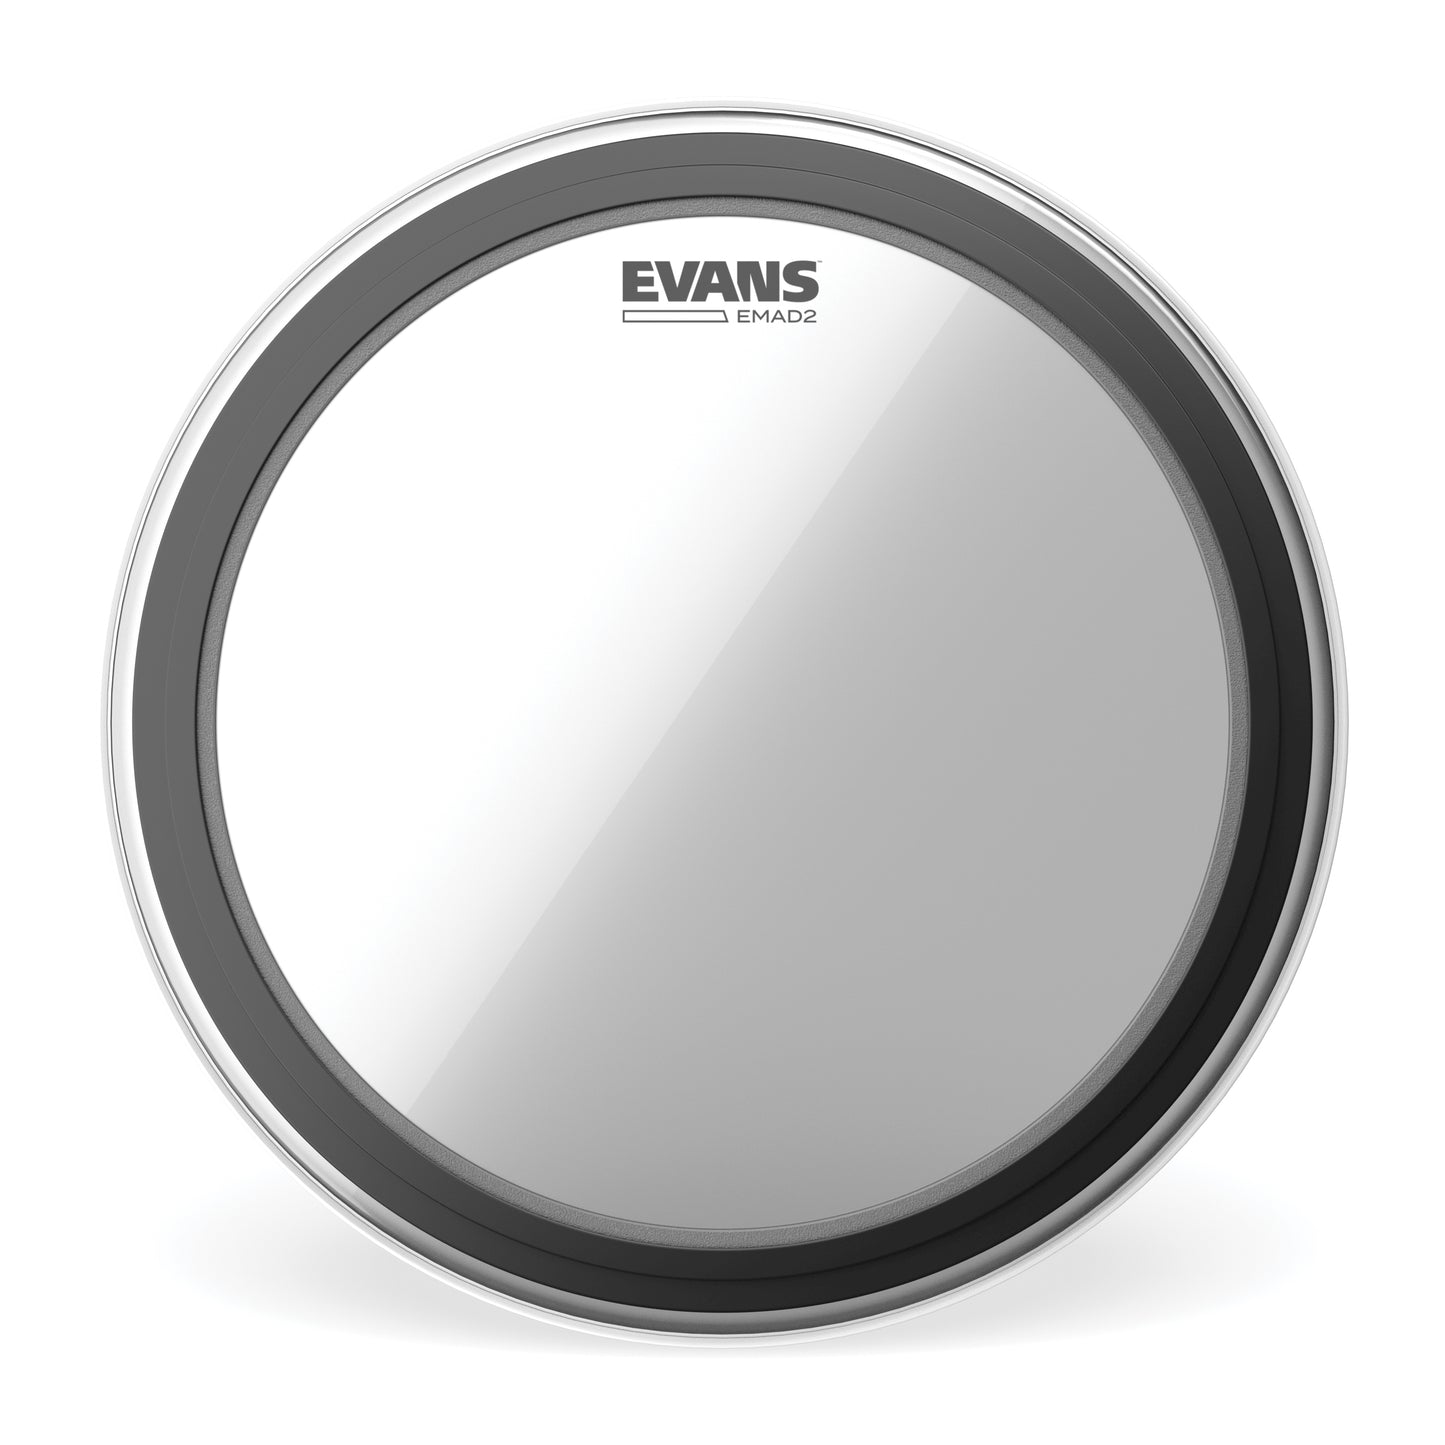 EVANS EMAD2 CLEAR BASS BATTER